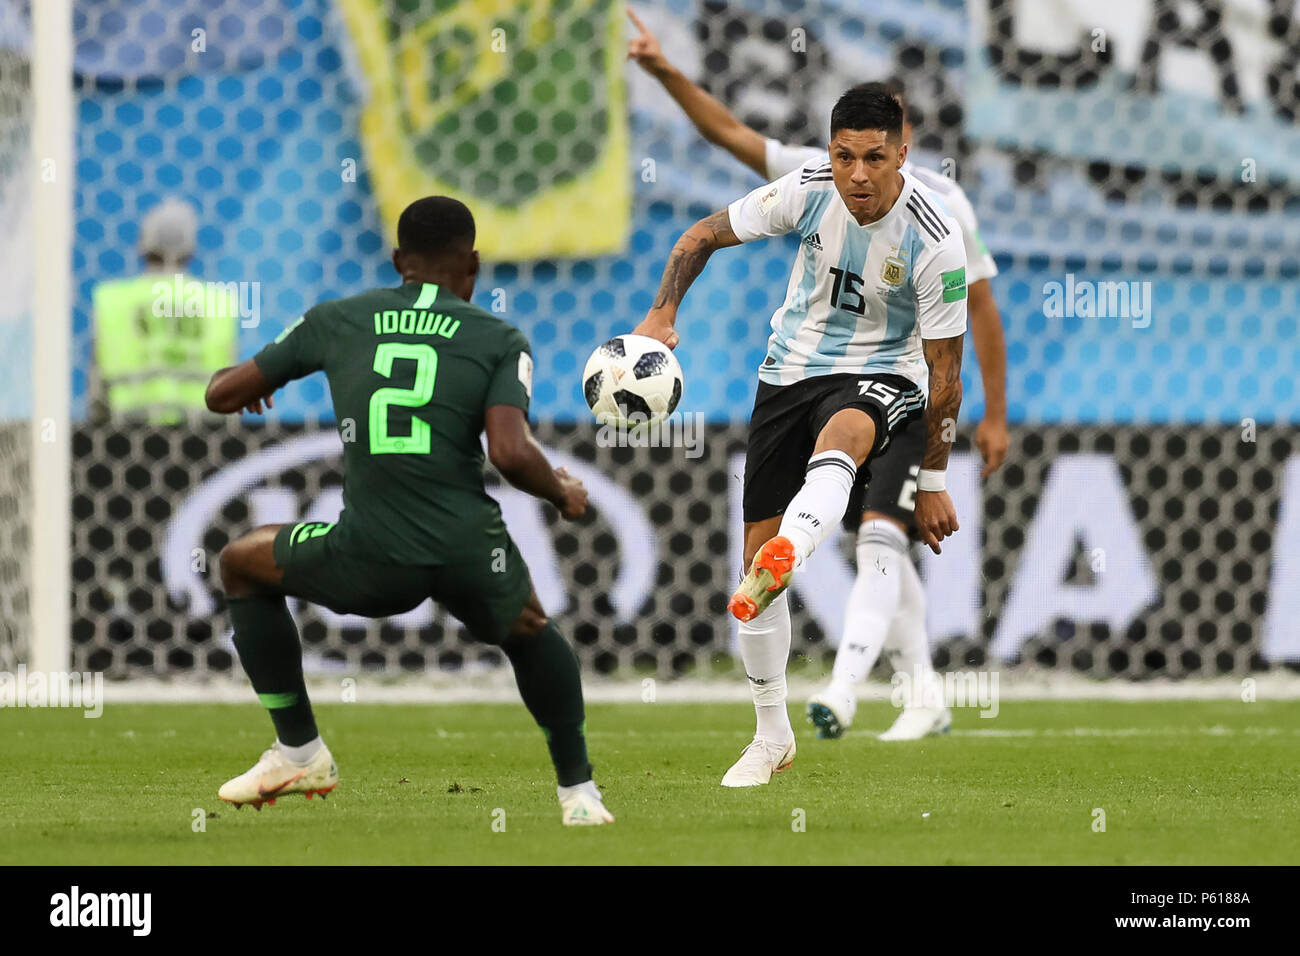 St Petersburg, Russia. 26th Jun, 2018. Enzo Perez of Argentina during the 2018 FIFA World Cup Group D match between Nigeria and Argentina at Saint Petersburg Stadium on June 26th 2018 in Saint Petersburg, Russia. (Photo by Daniel Chesterton/phcimages.com) Credit: PHC Images/Alamy Live News Stock Photo